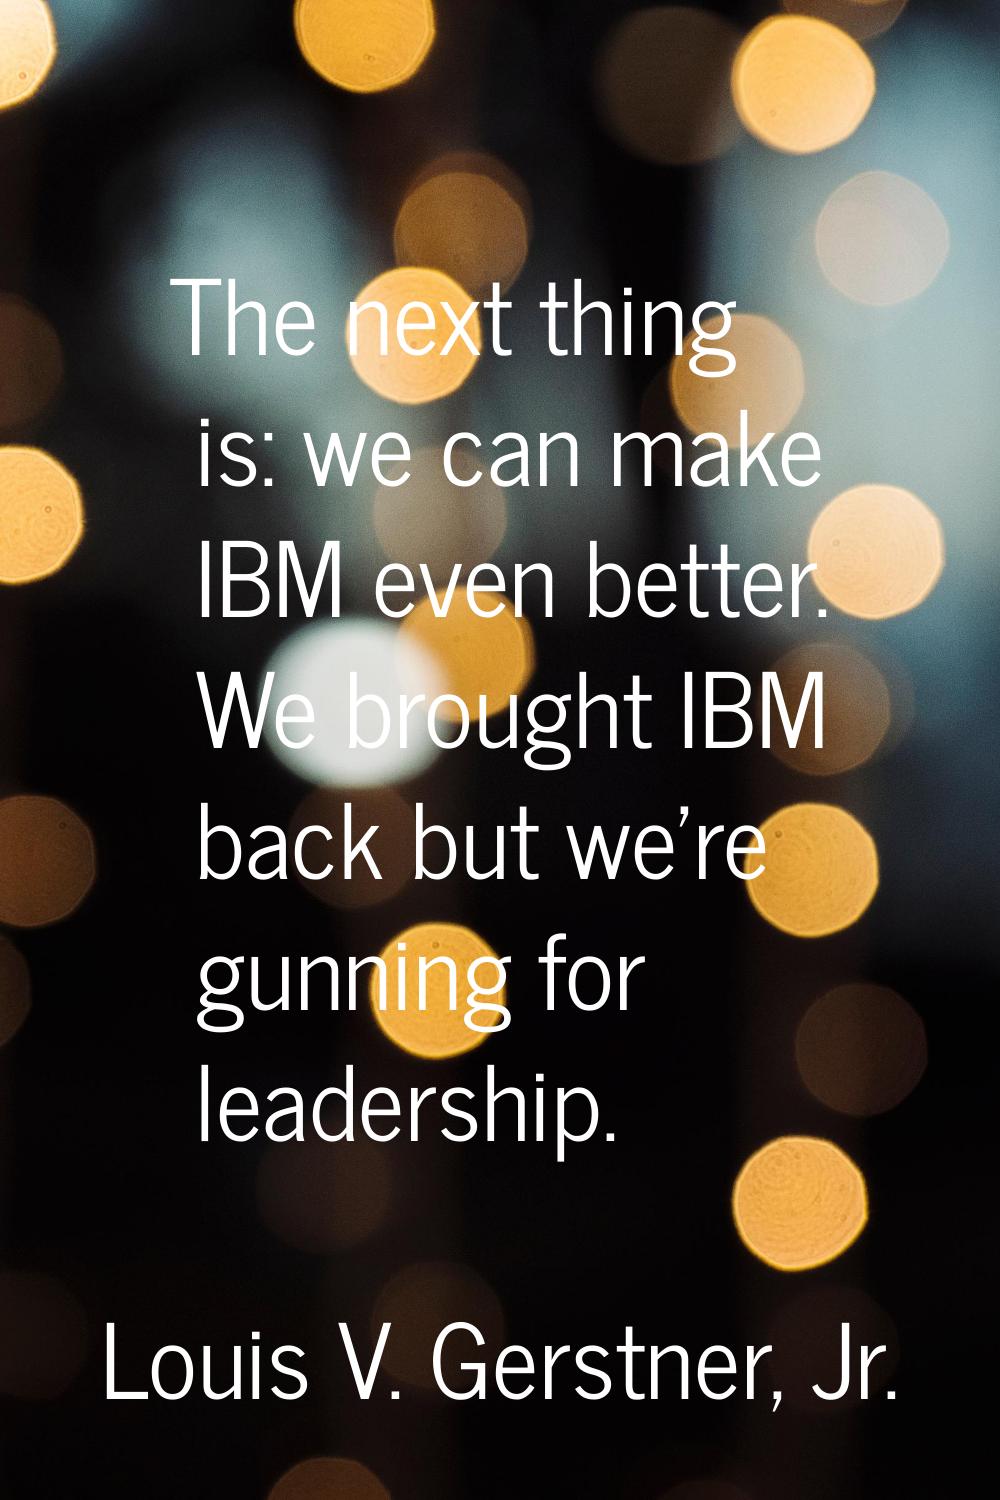 The next thing is: we can make IBM even better. We brought IBM back but we're gunning for leadershi